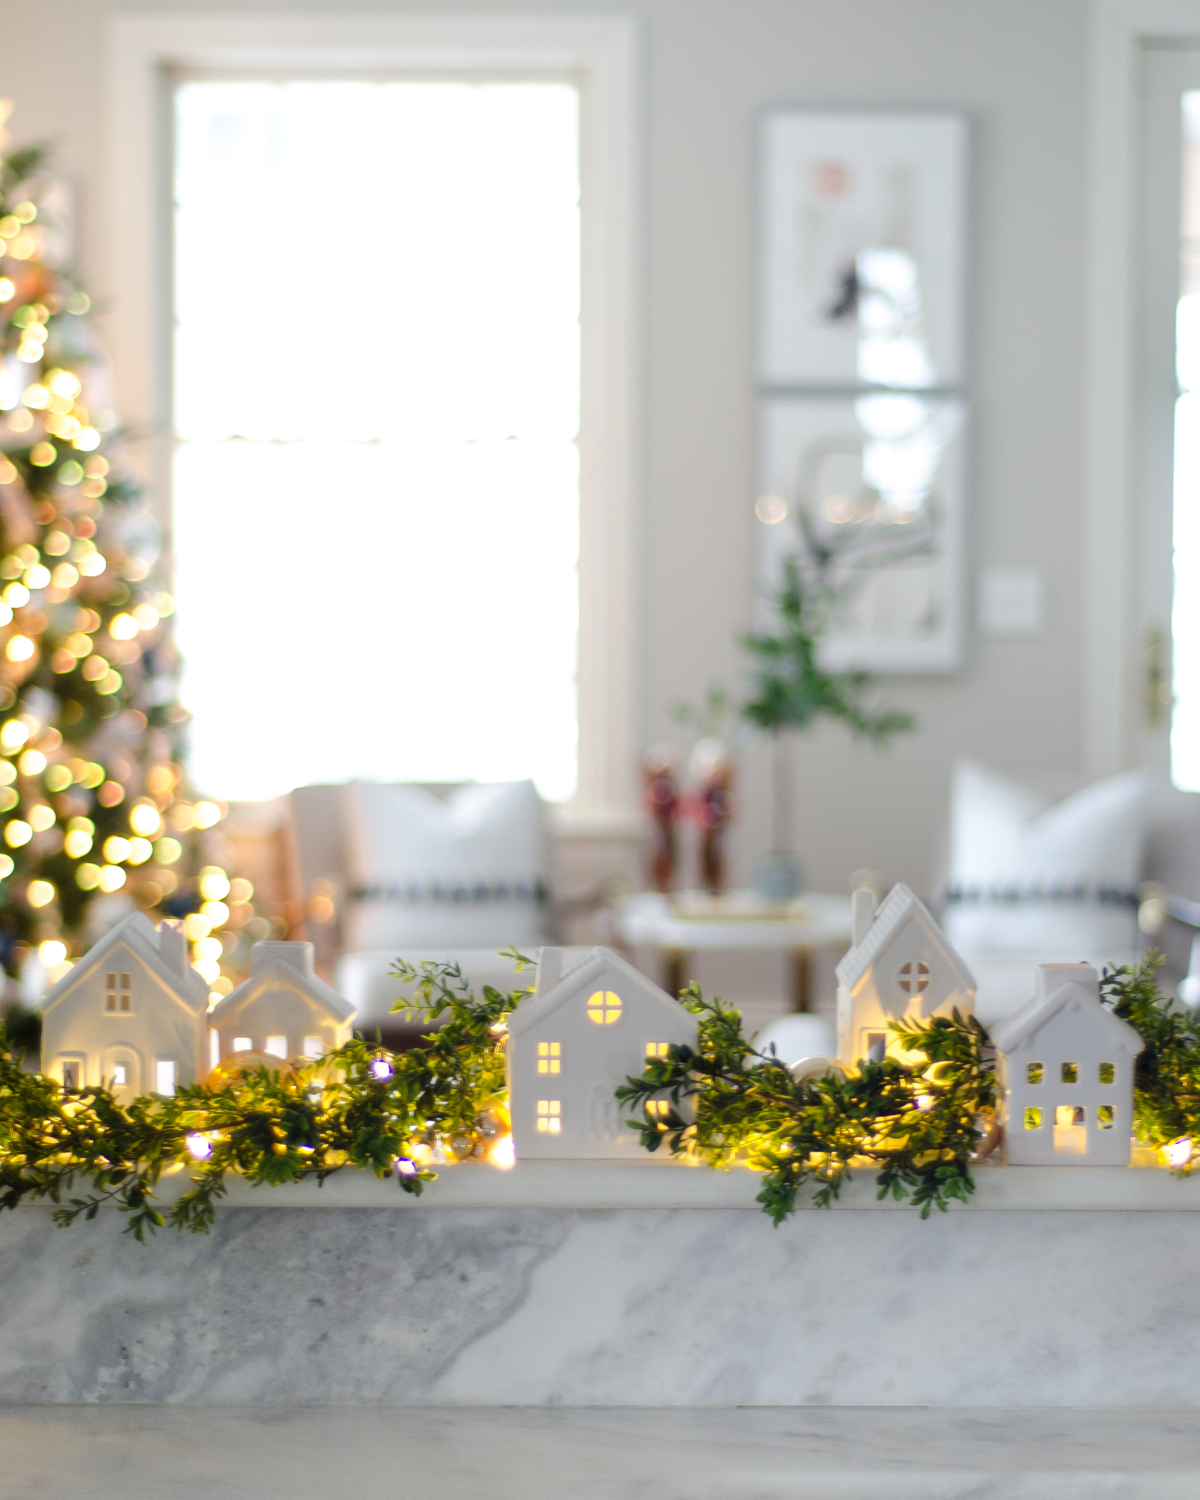 Christmas decorating ideas with white ceramic houses, boxwood garland, and twinkle lights.